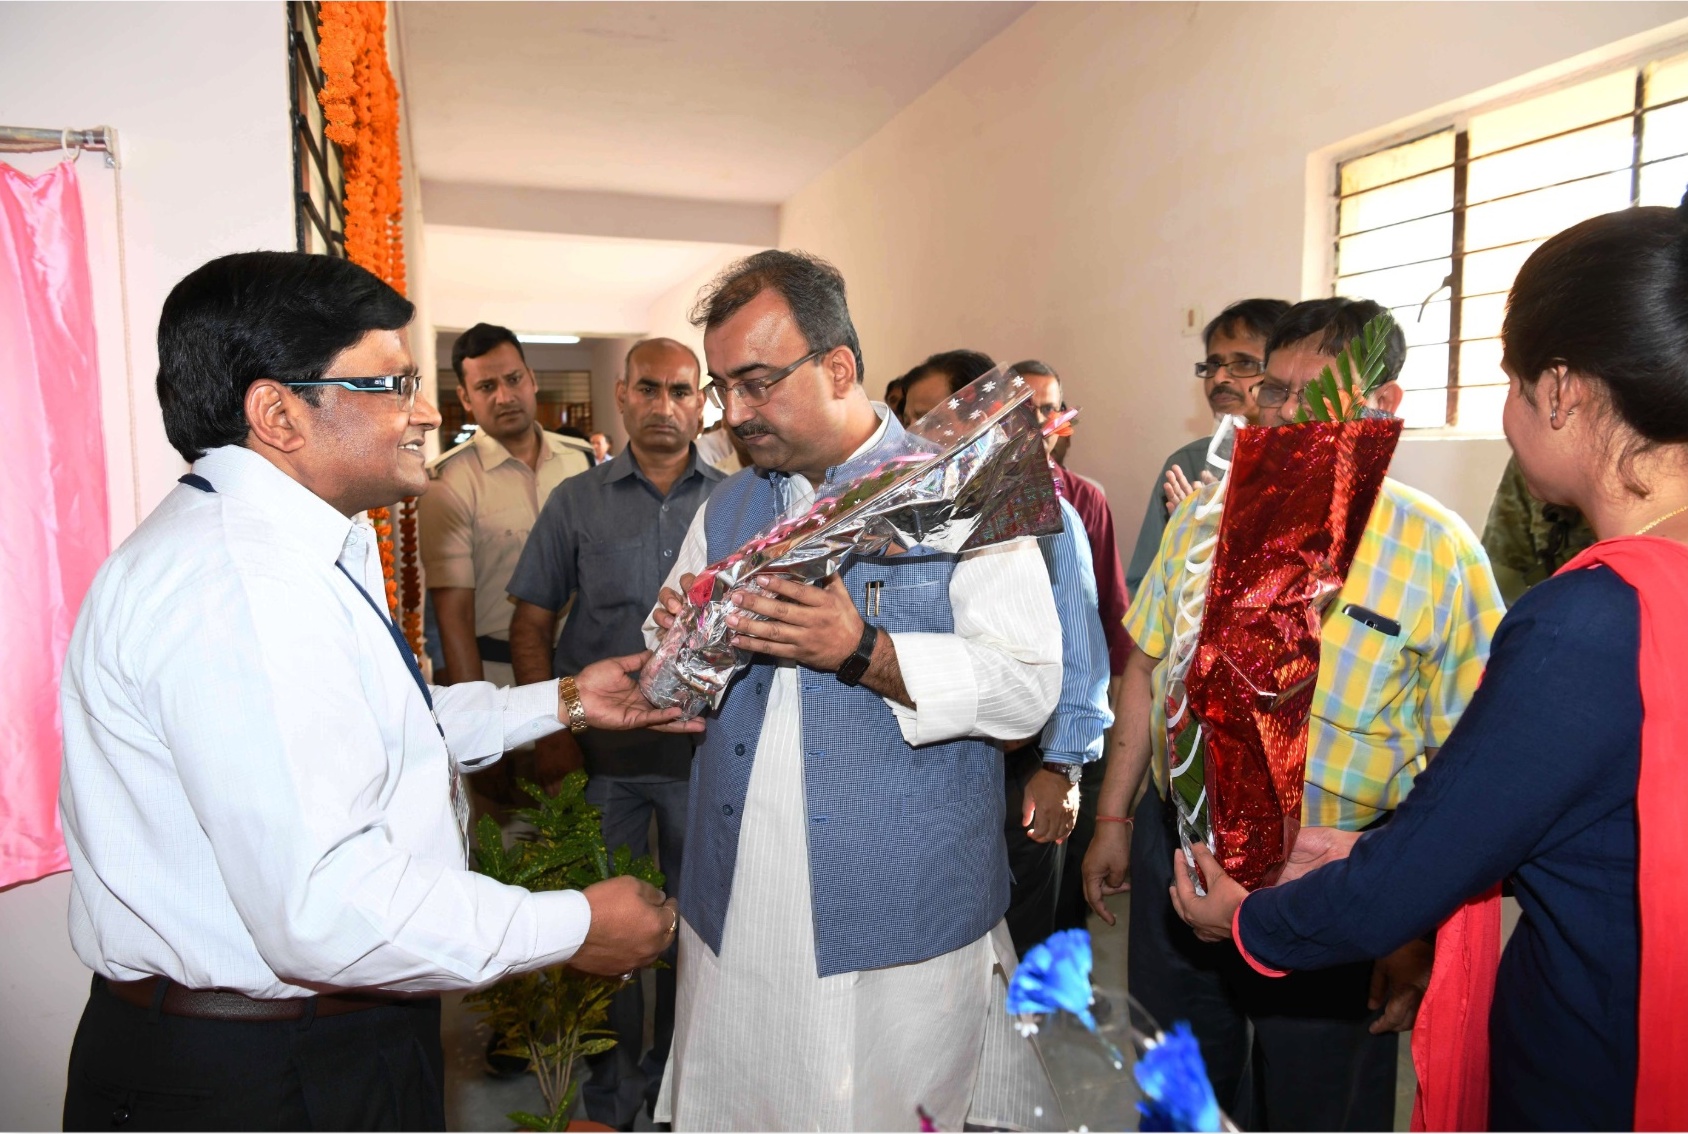 Inauguration of Central Gas Manifold Building: e